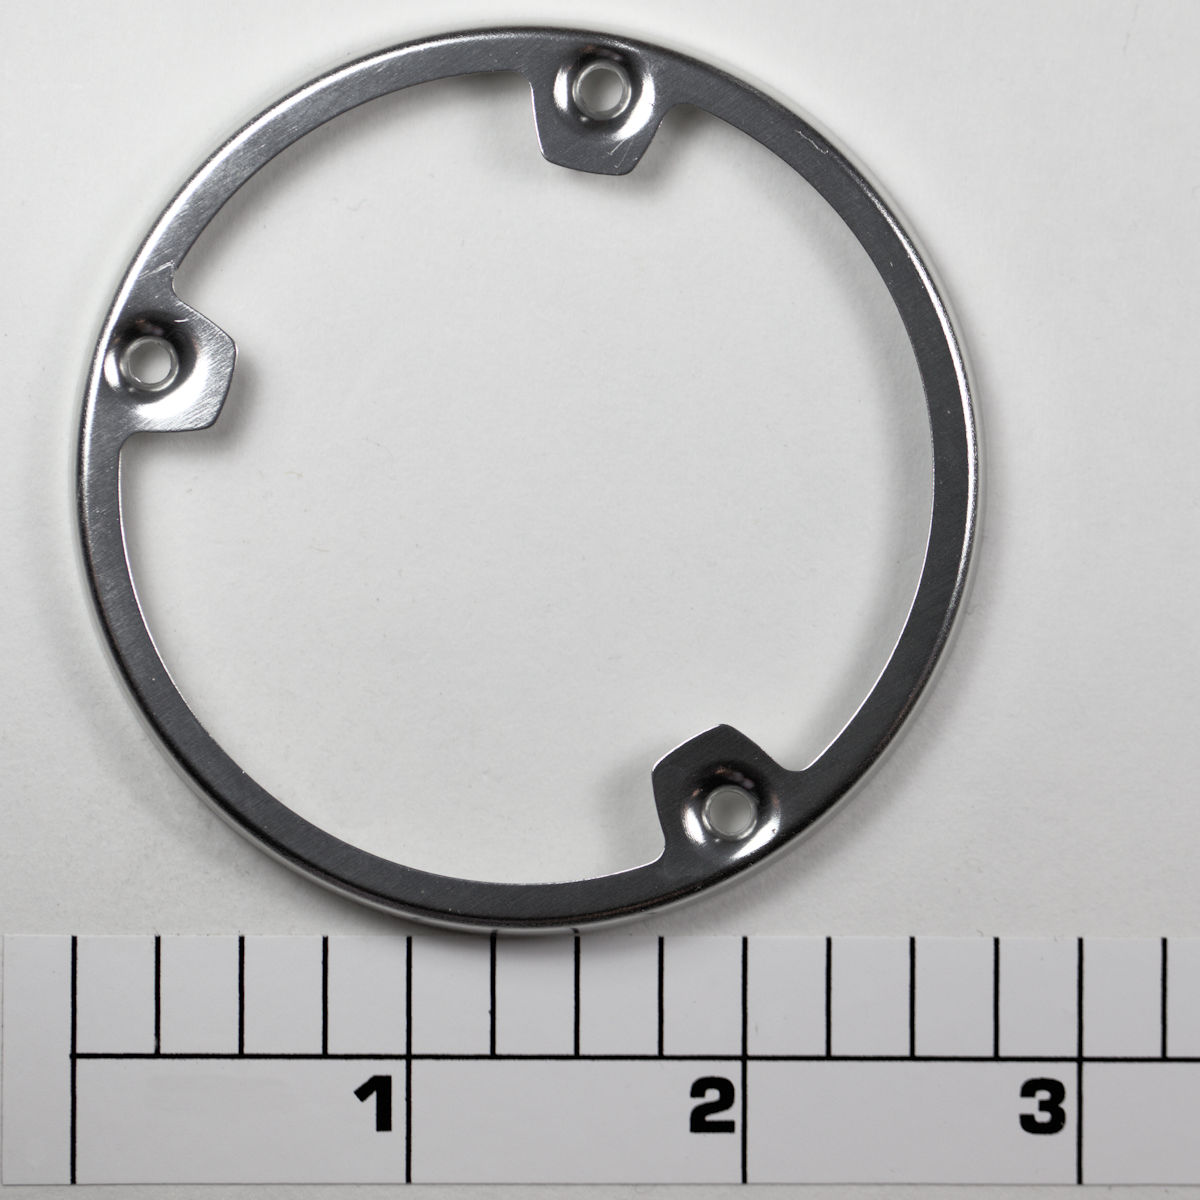 28-RVL15LW Ring, Non-handle Side Ring